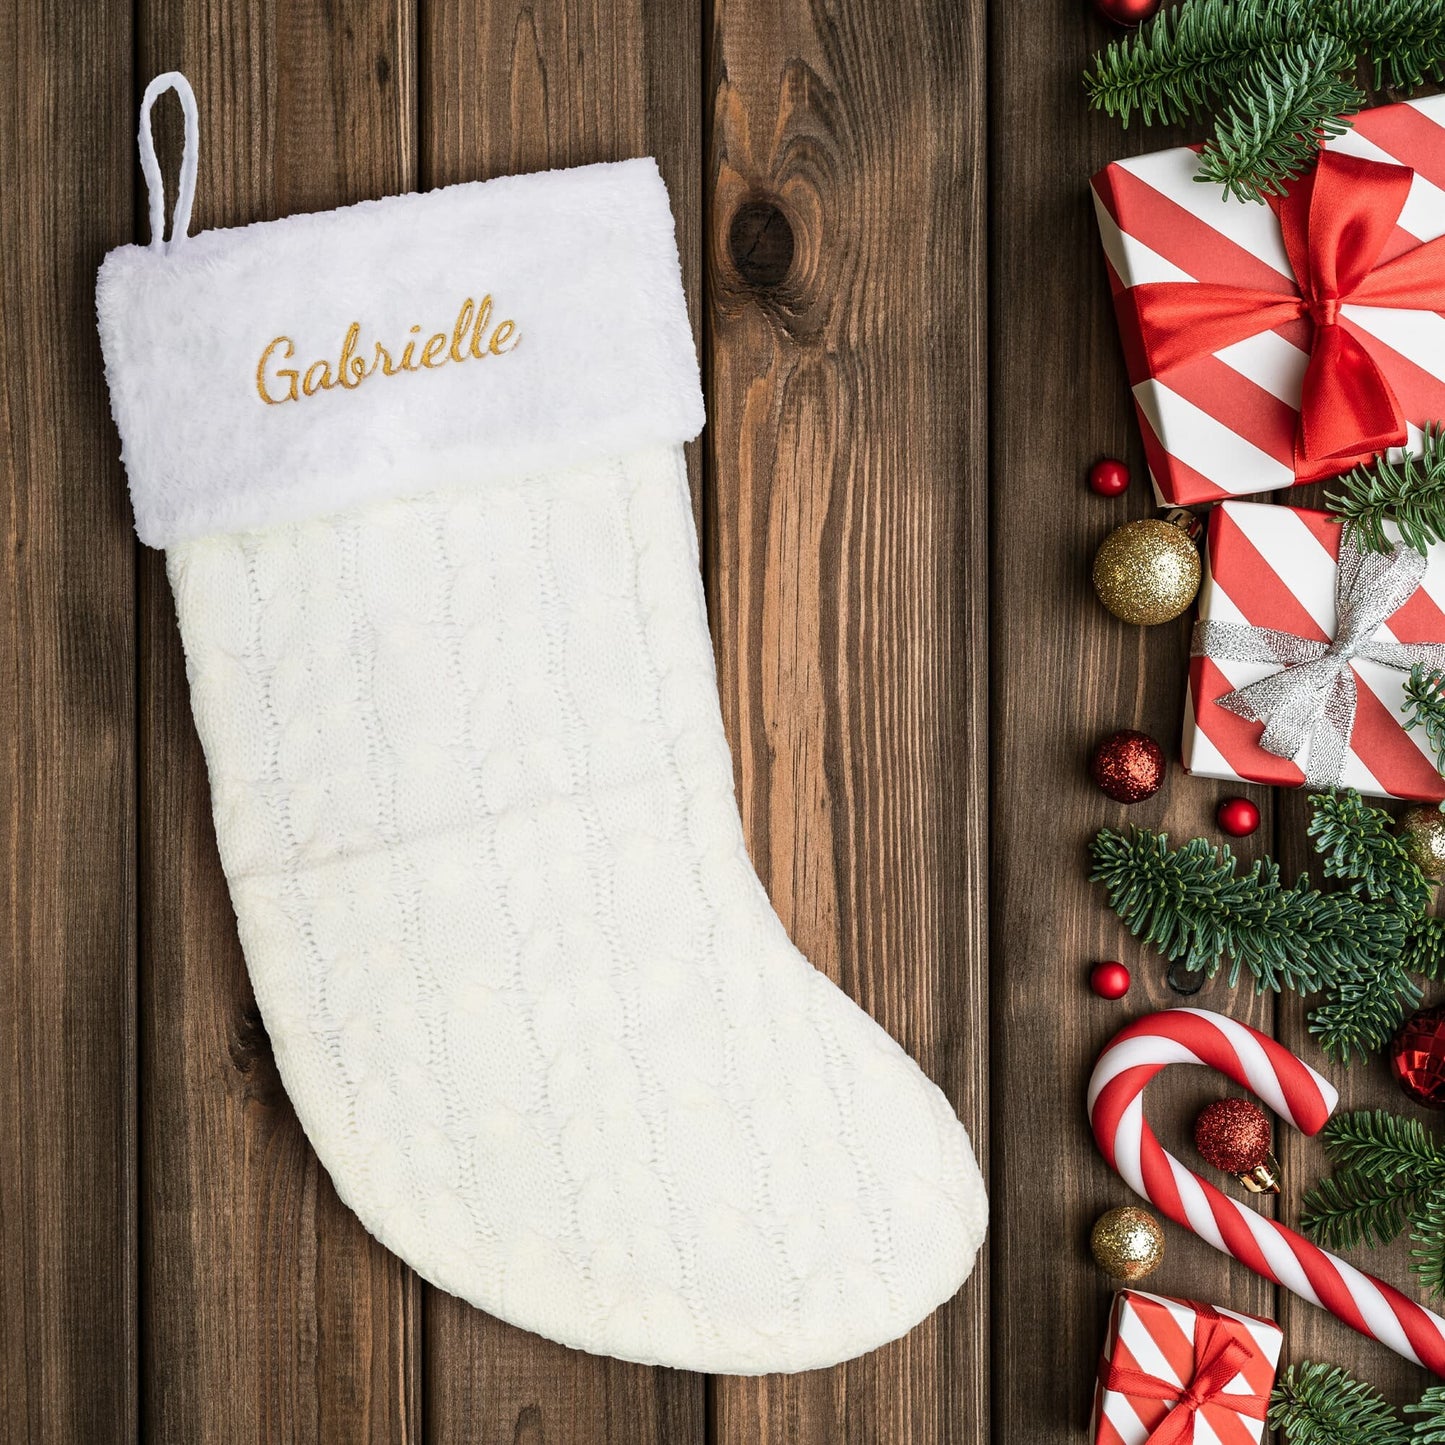 Personalize Christmas Stocking Embroidered Decoration